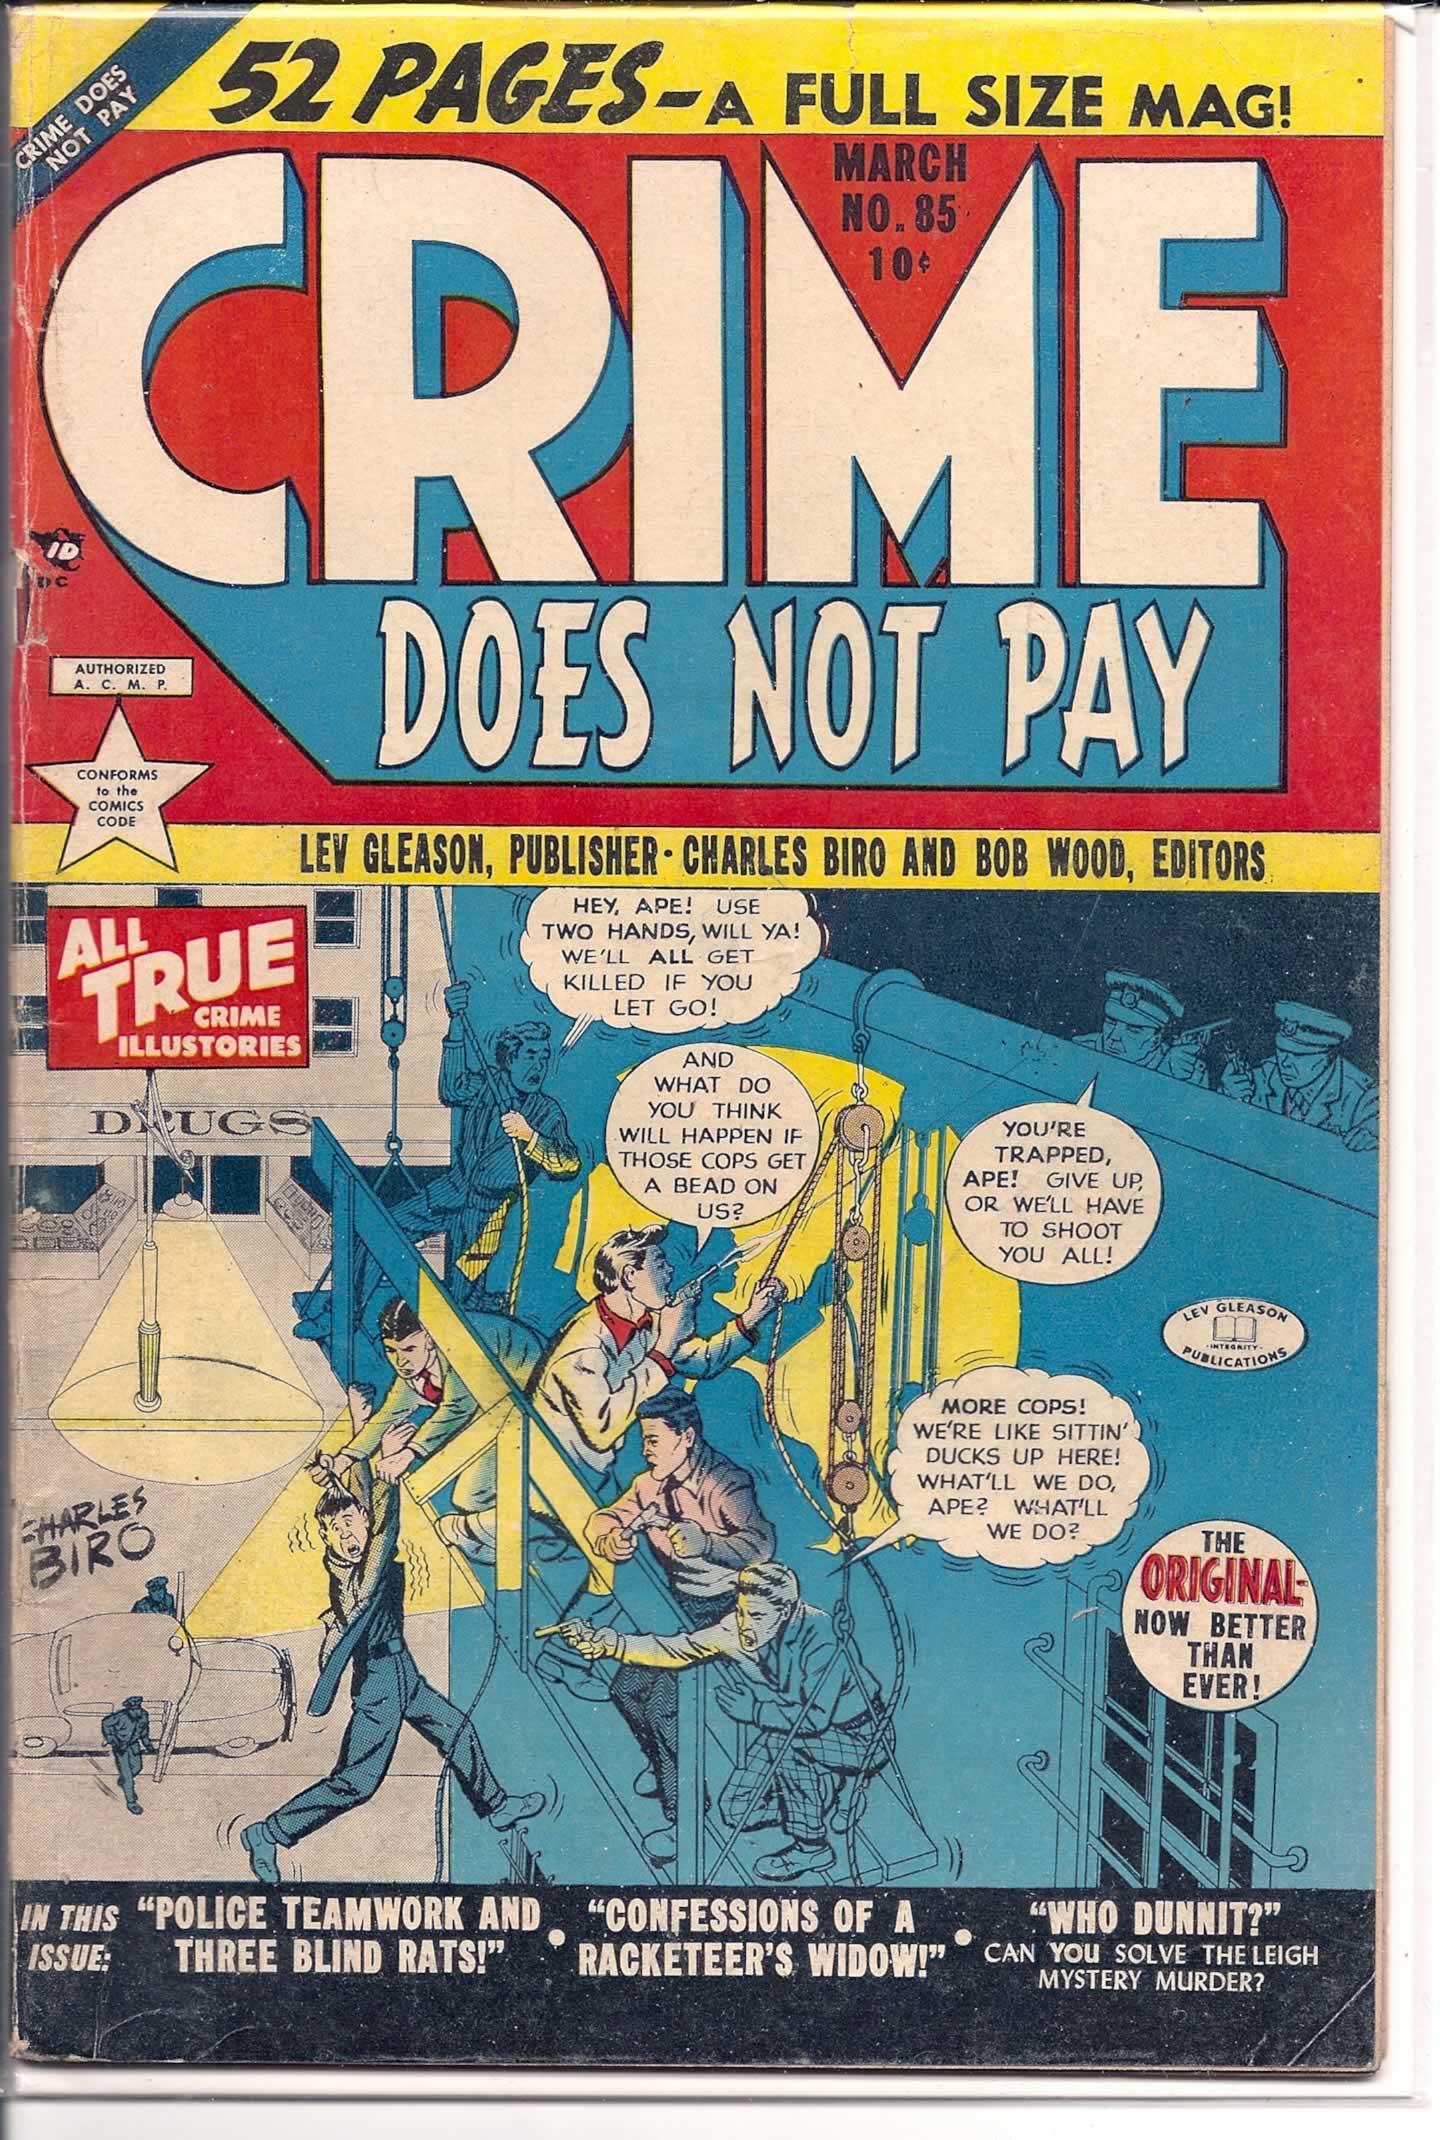 CRIME DOES NOT PAY